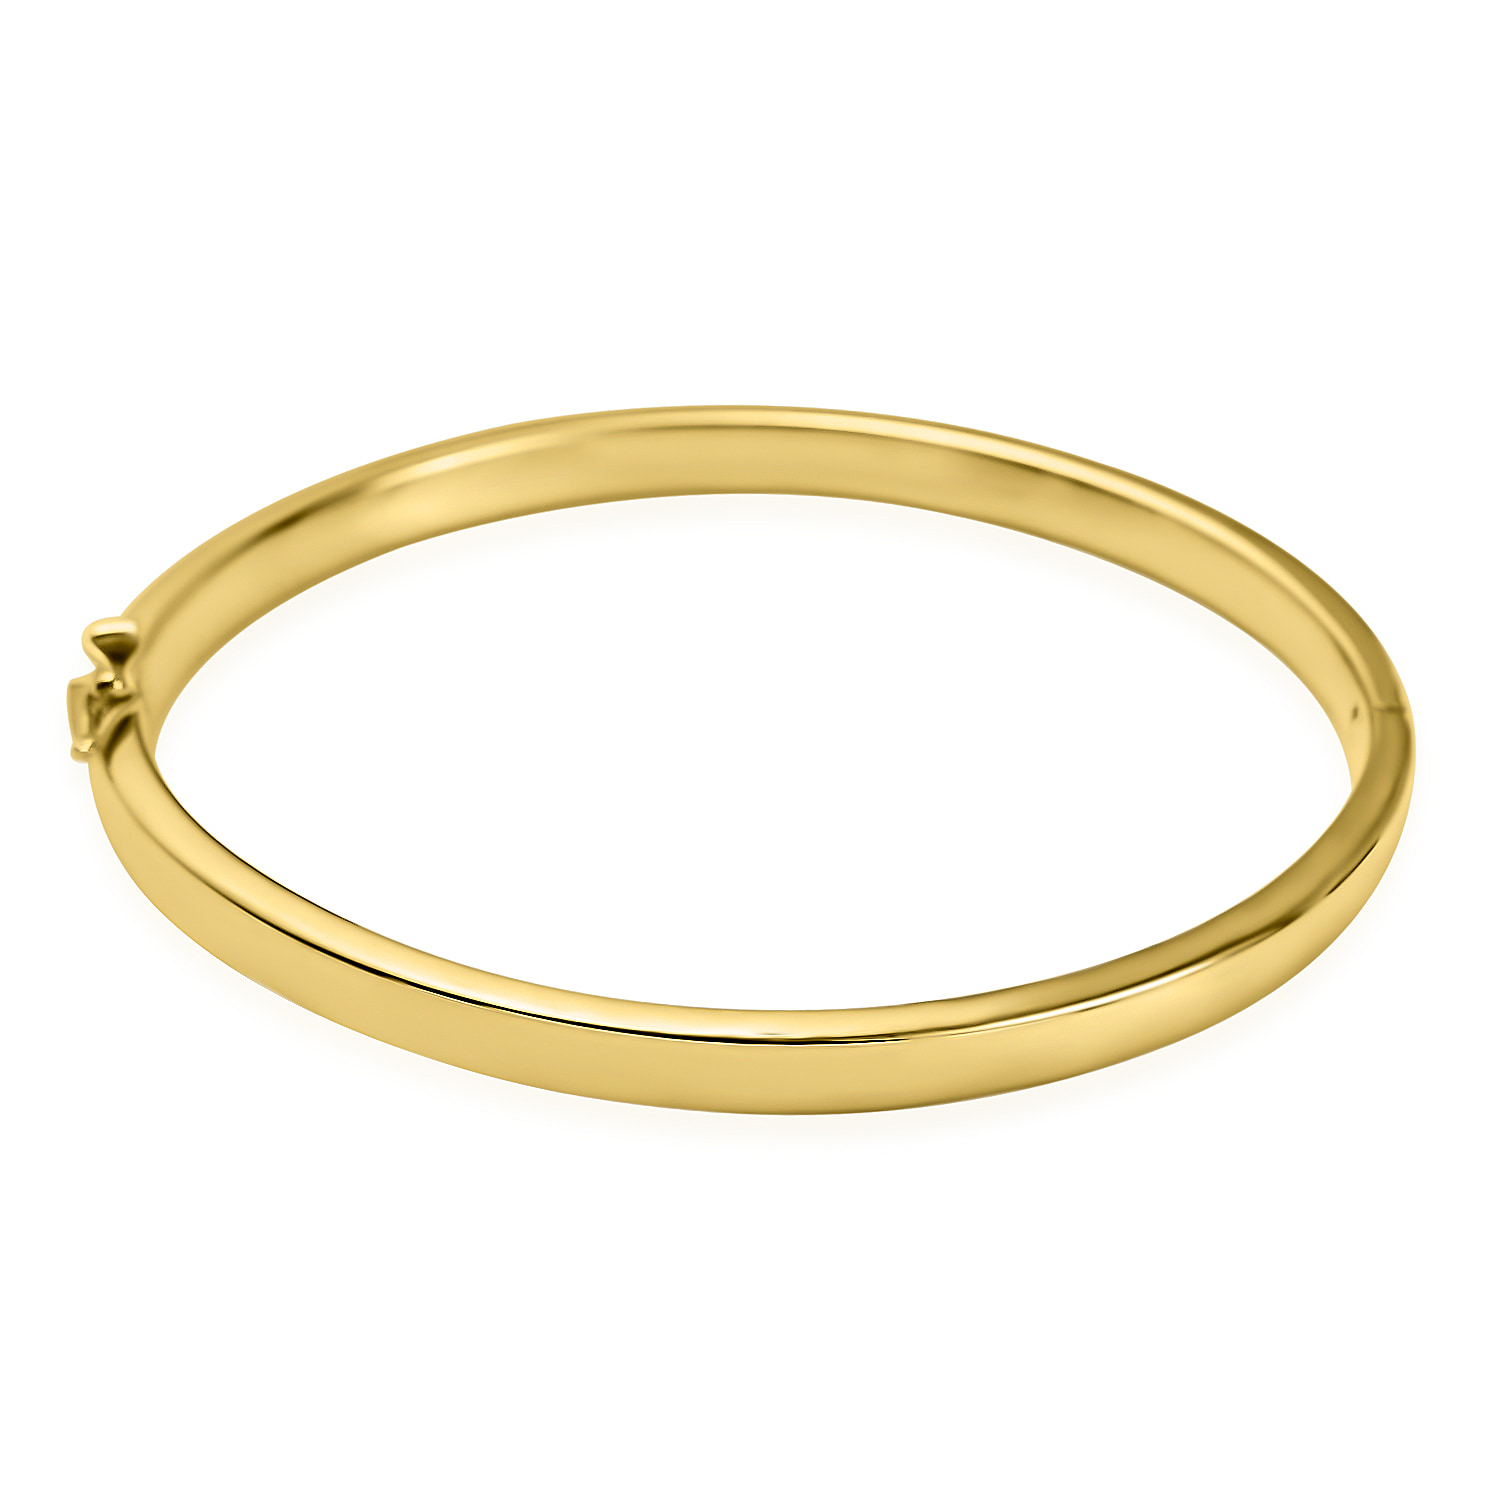 9K Yellow Gold 5MM Oval Hinged Bangle Size 7.5 , Gold Wt. 9.7Gms